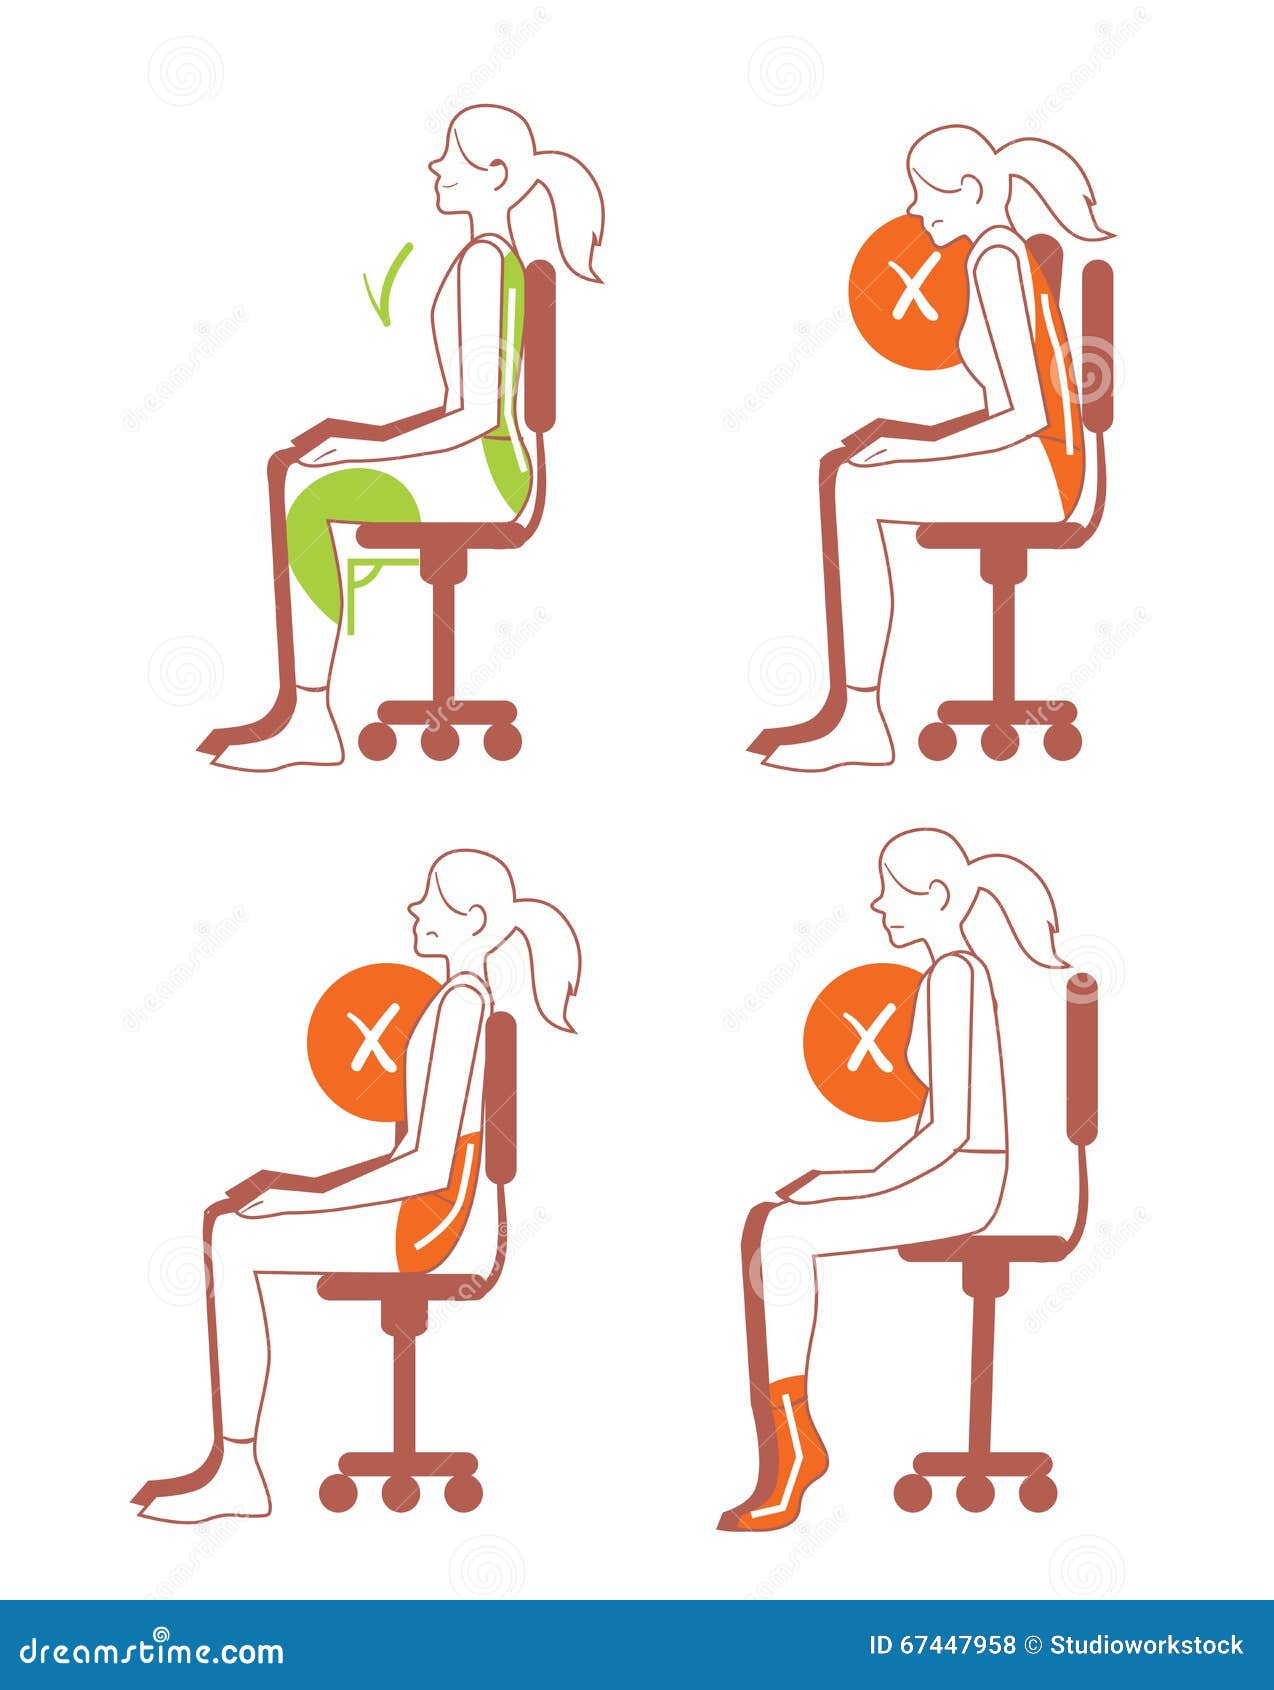 sitting positions, correct spine posture